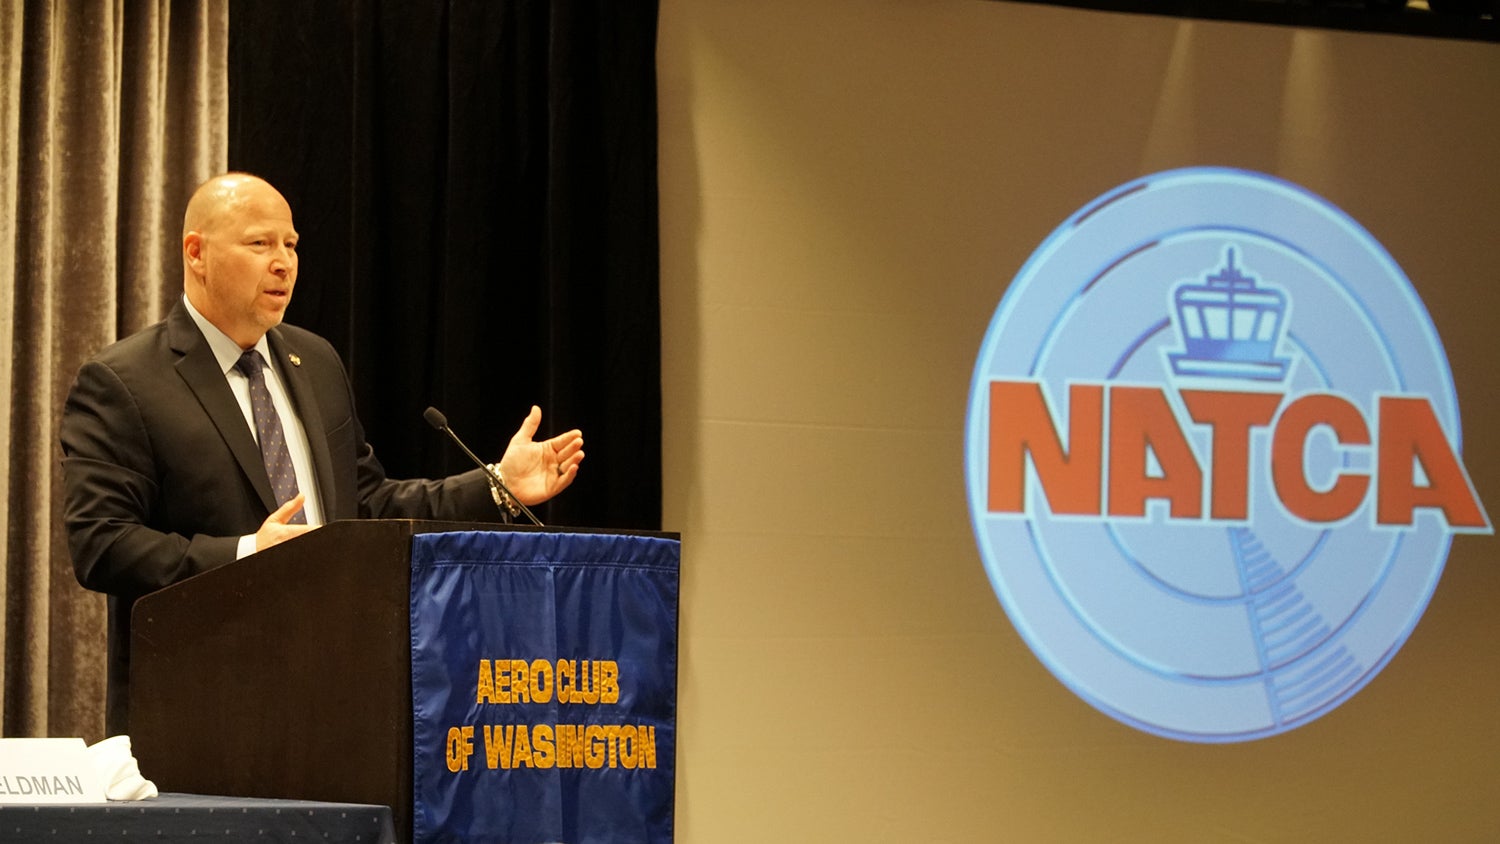 NATCA President Offers an Insider View of the Shutdown